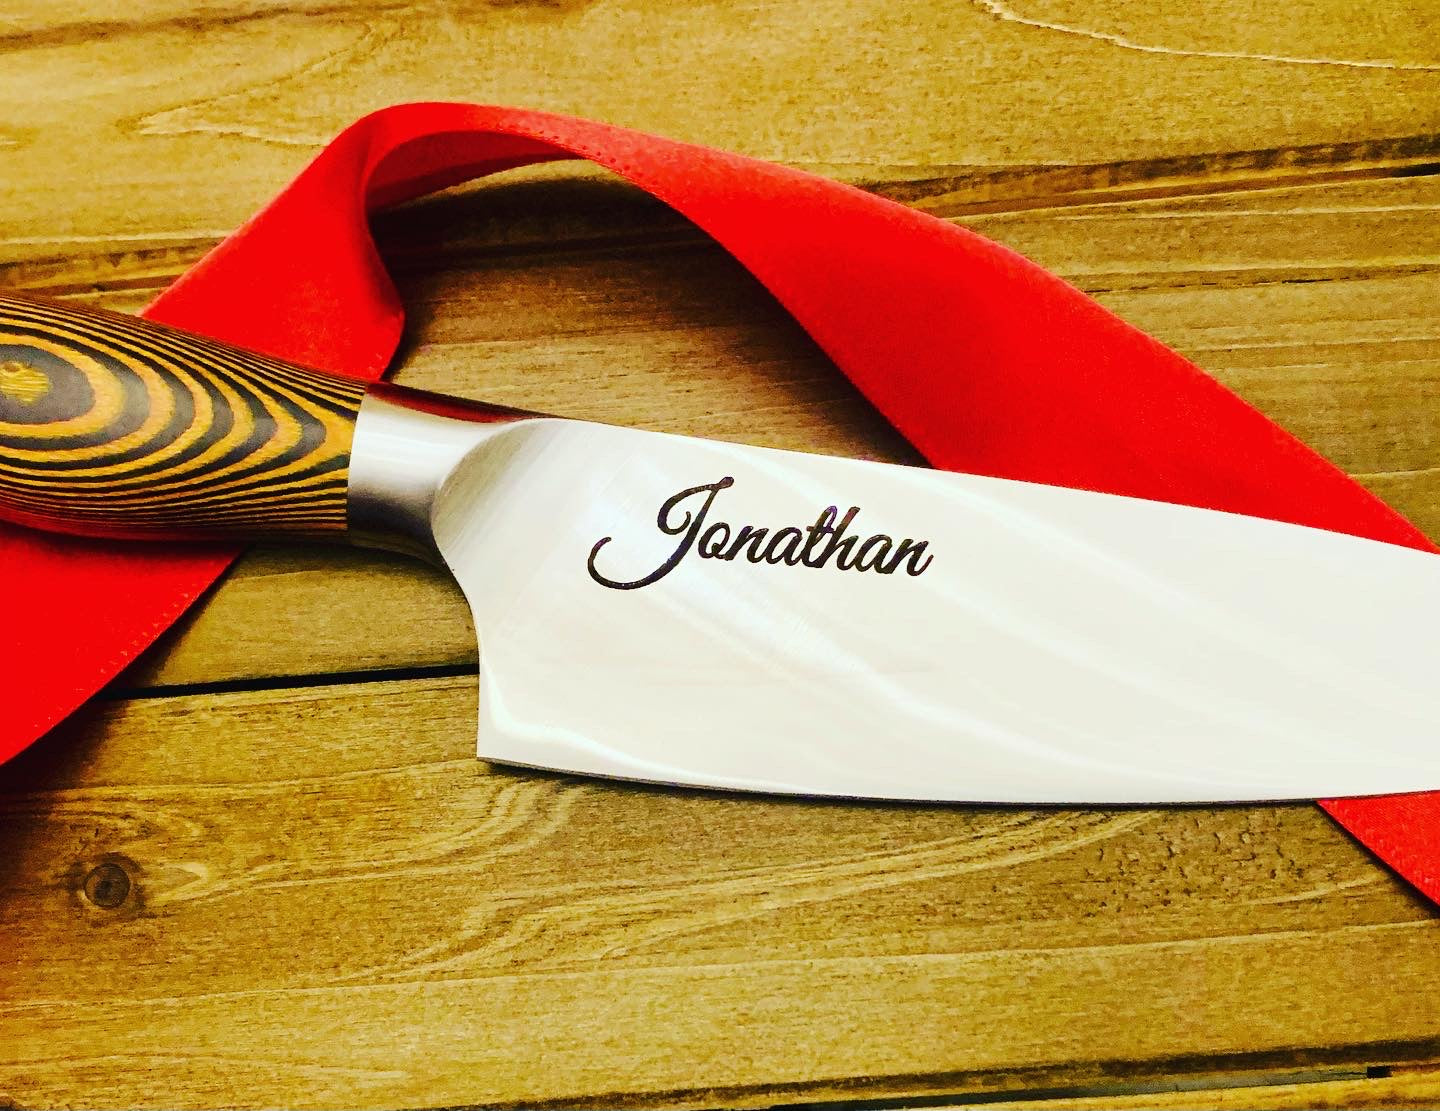 Customizable Stainless Steel Chef's Kitchen Knife with Laser Engraved Monogram - Professional Quality, Personalized Touch